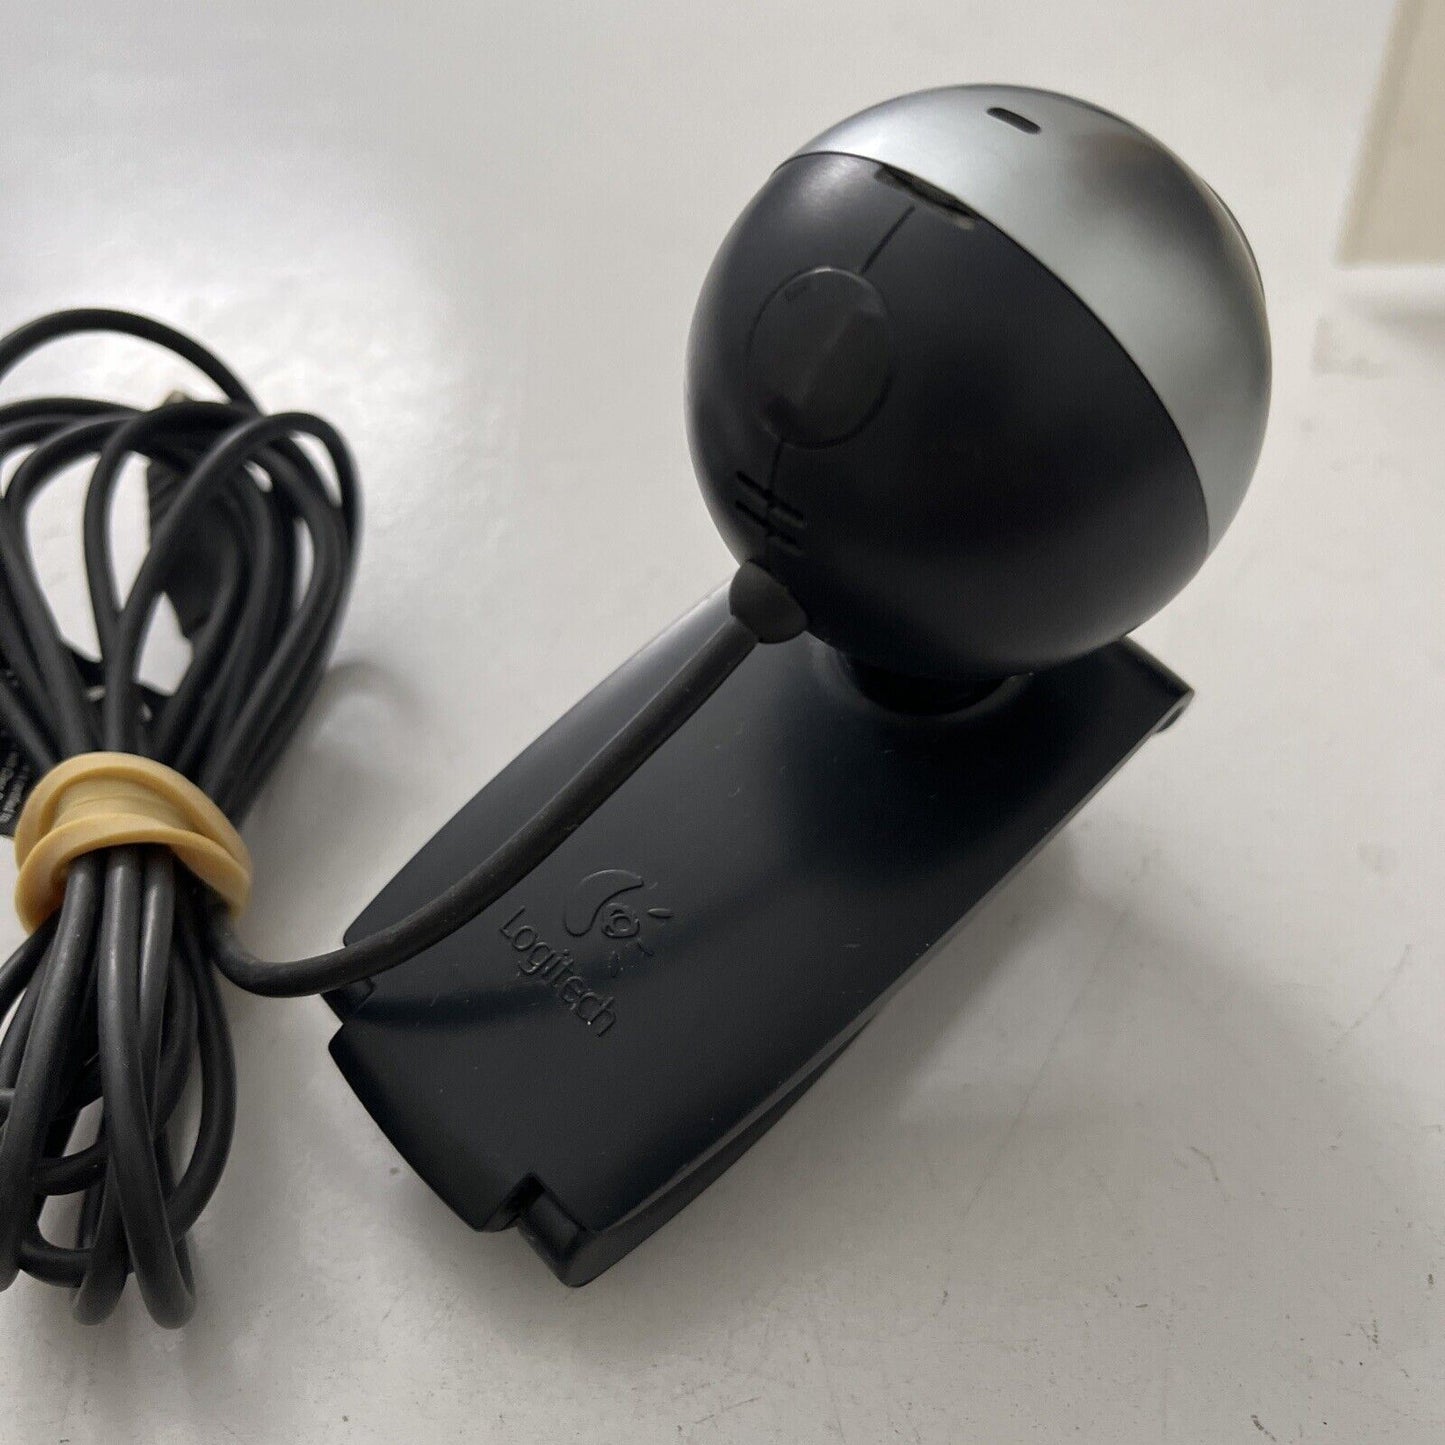 Logitech Quickcam Connect Clip-On Webcam V-UBB39 USB with Built-in Microphone